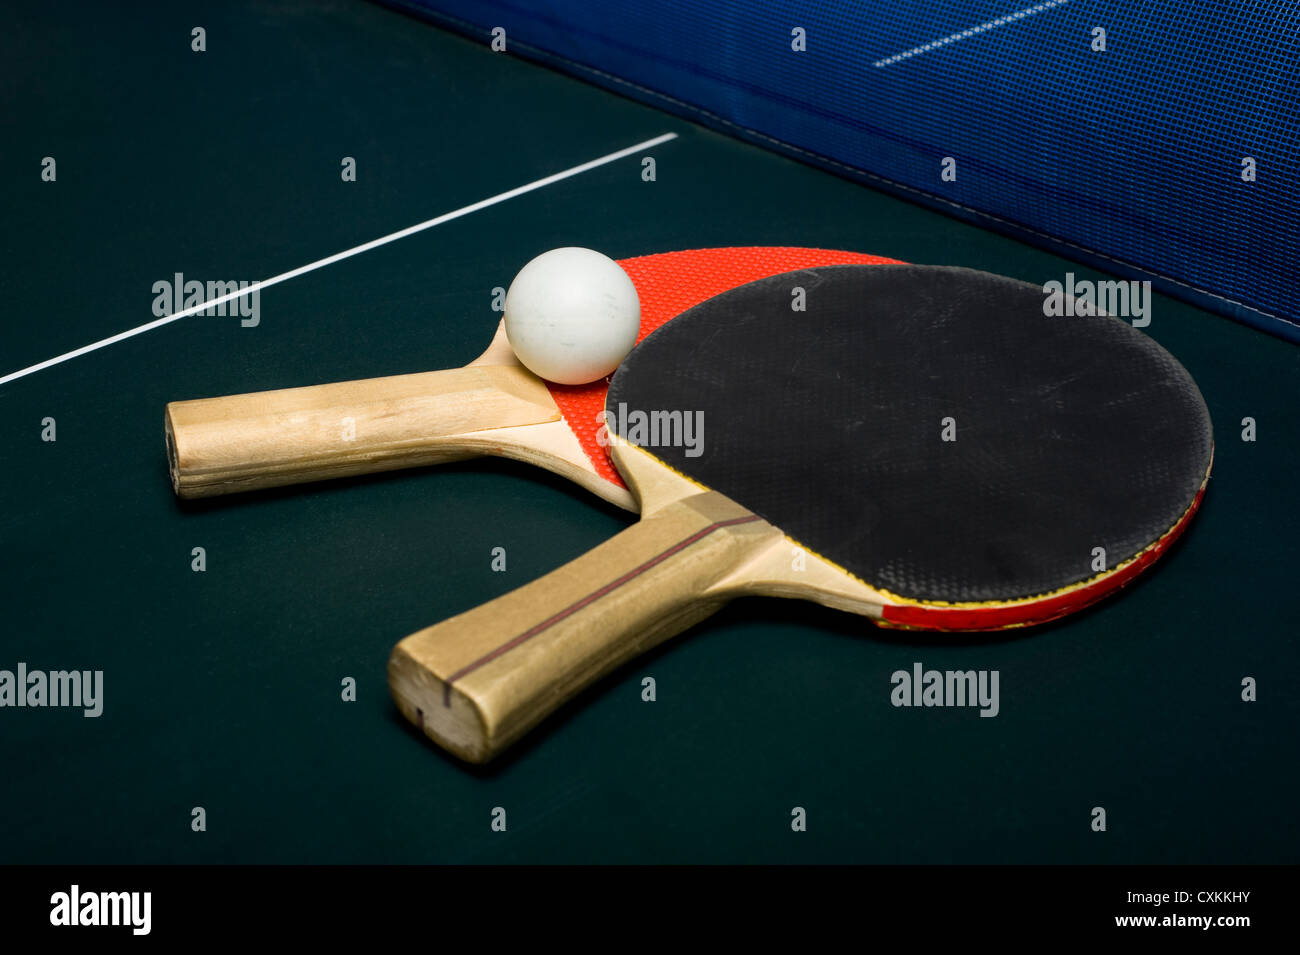 Ping-pong or table tennis equipment or supplies on a playing surface Stock Photo